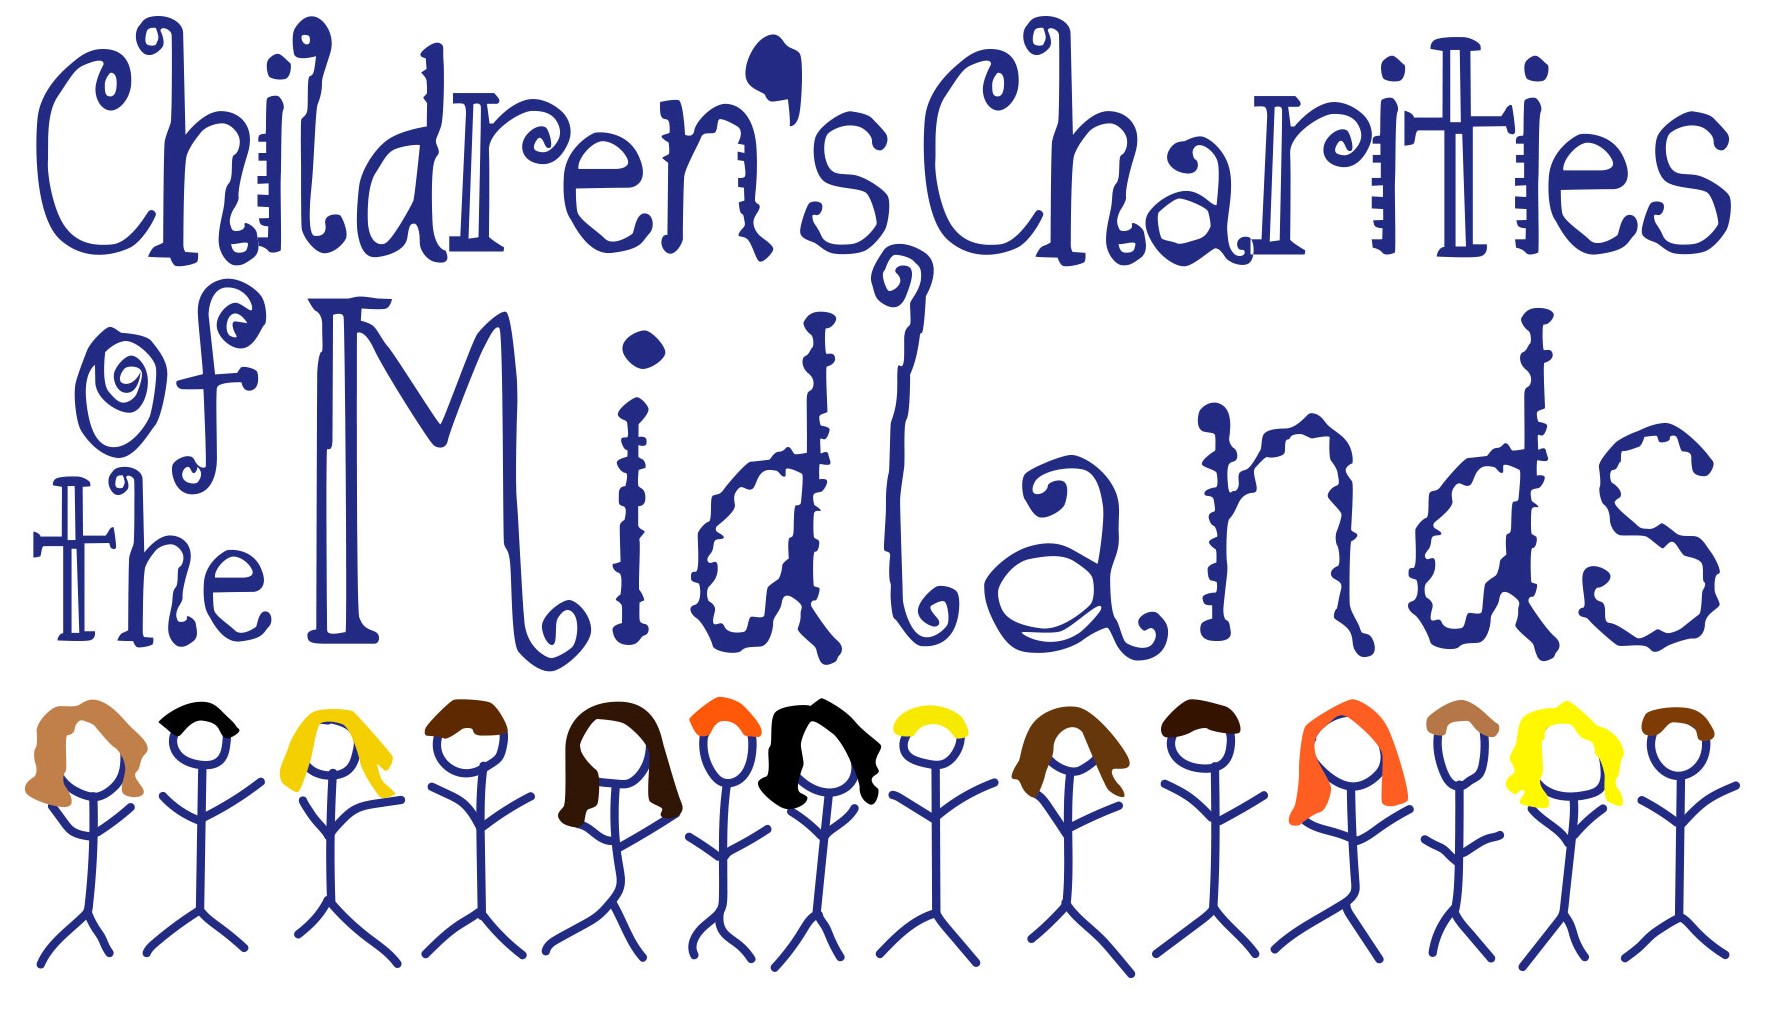 Childrens Charities of the Midlands